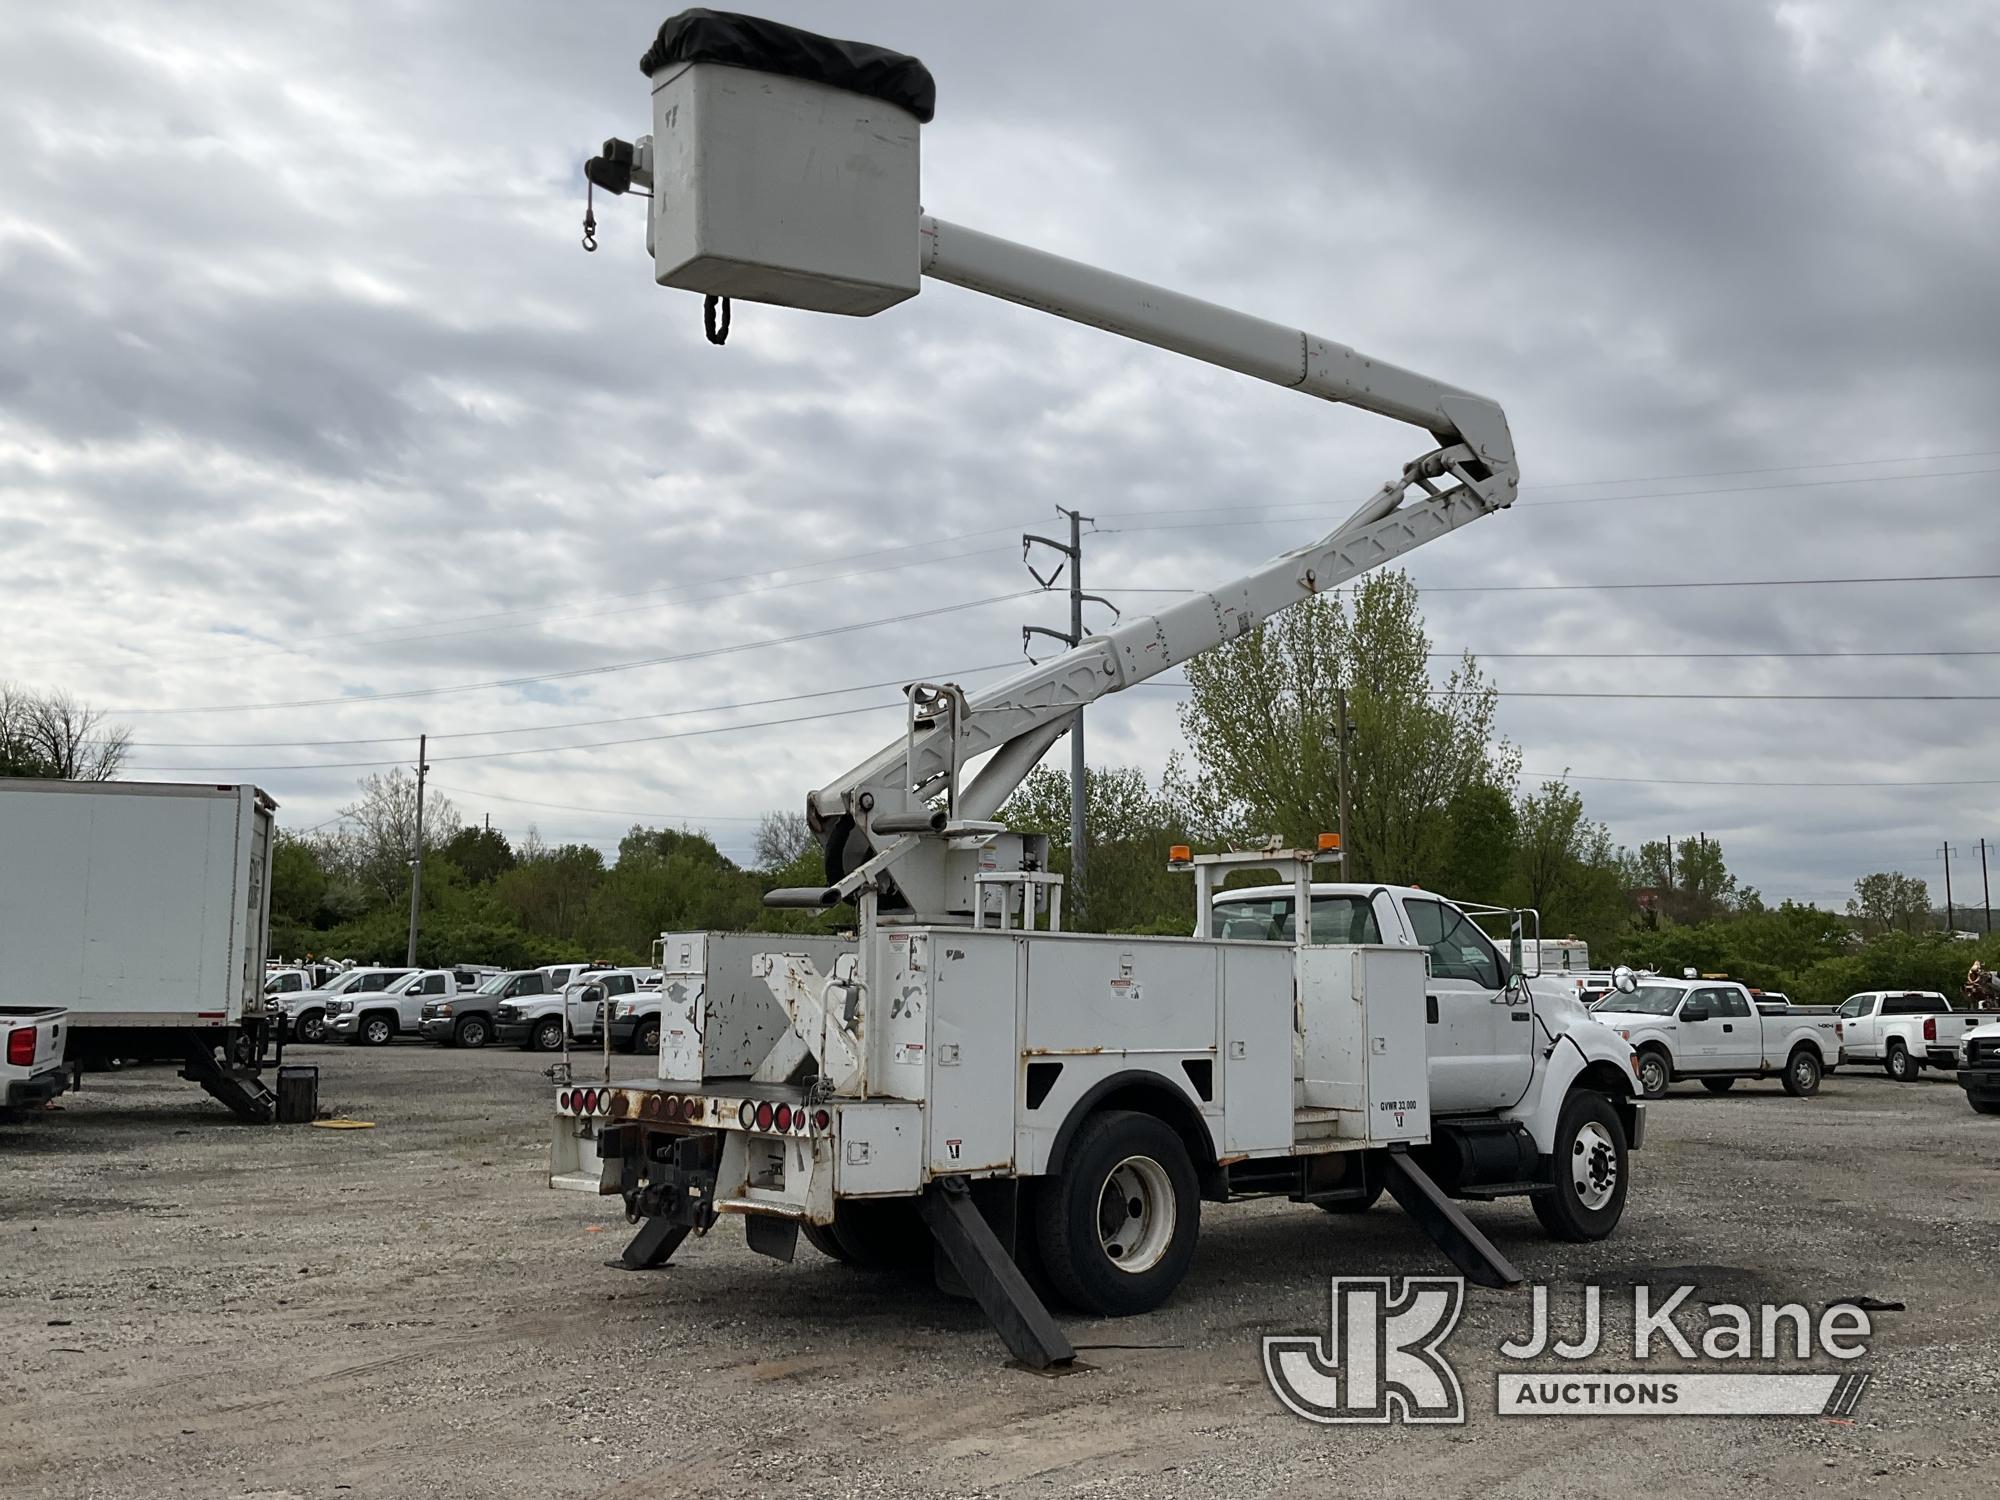 (Plymouth Meeting, PA) Terex/HiRanger HRX55-MH, Material Handling Bucket Truck rear mounted on 2007